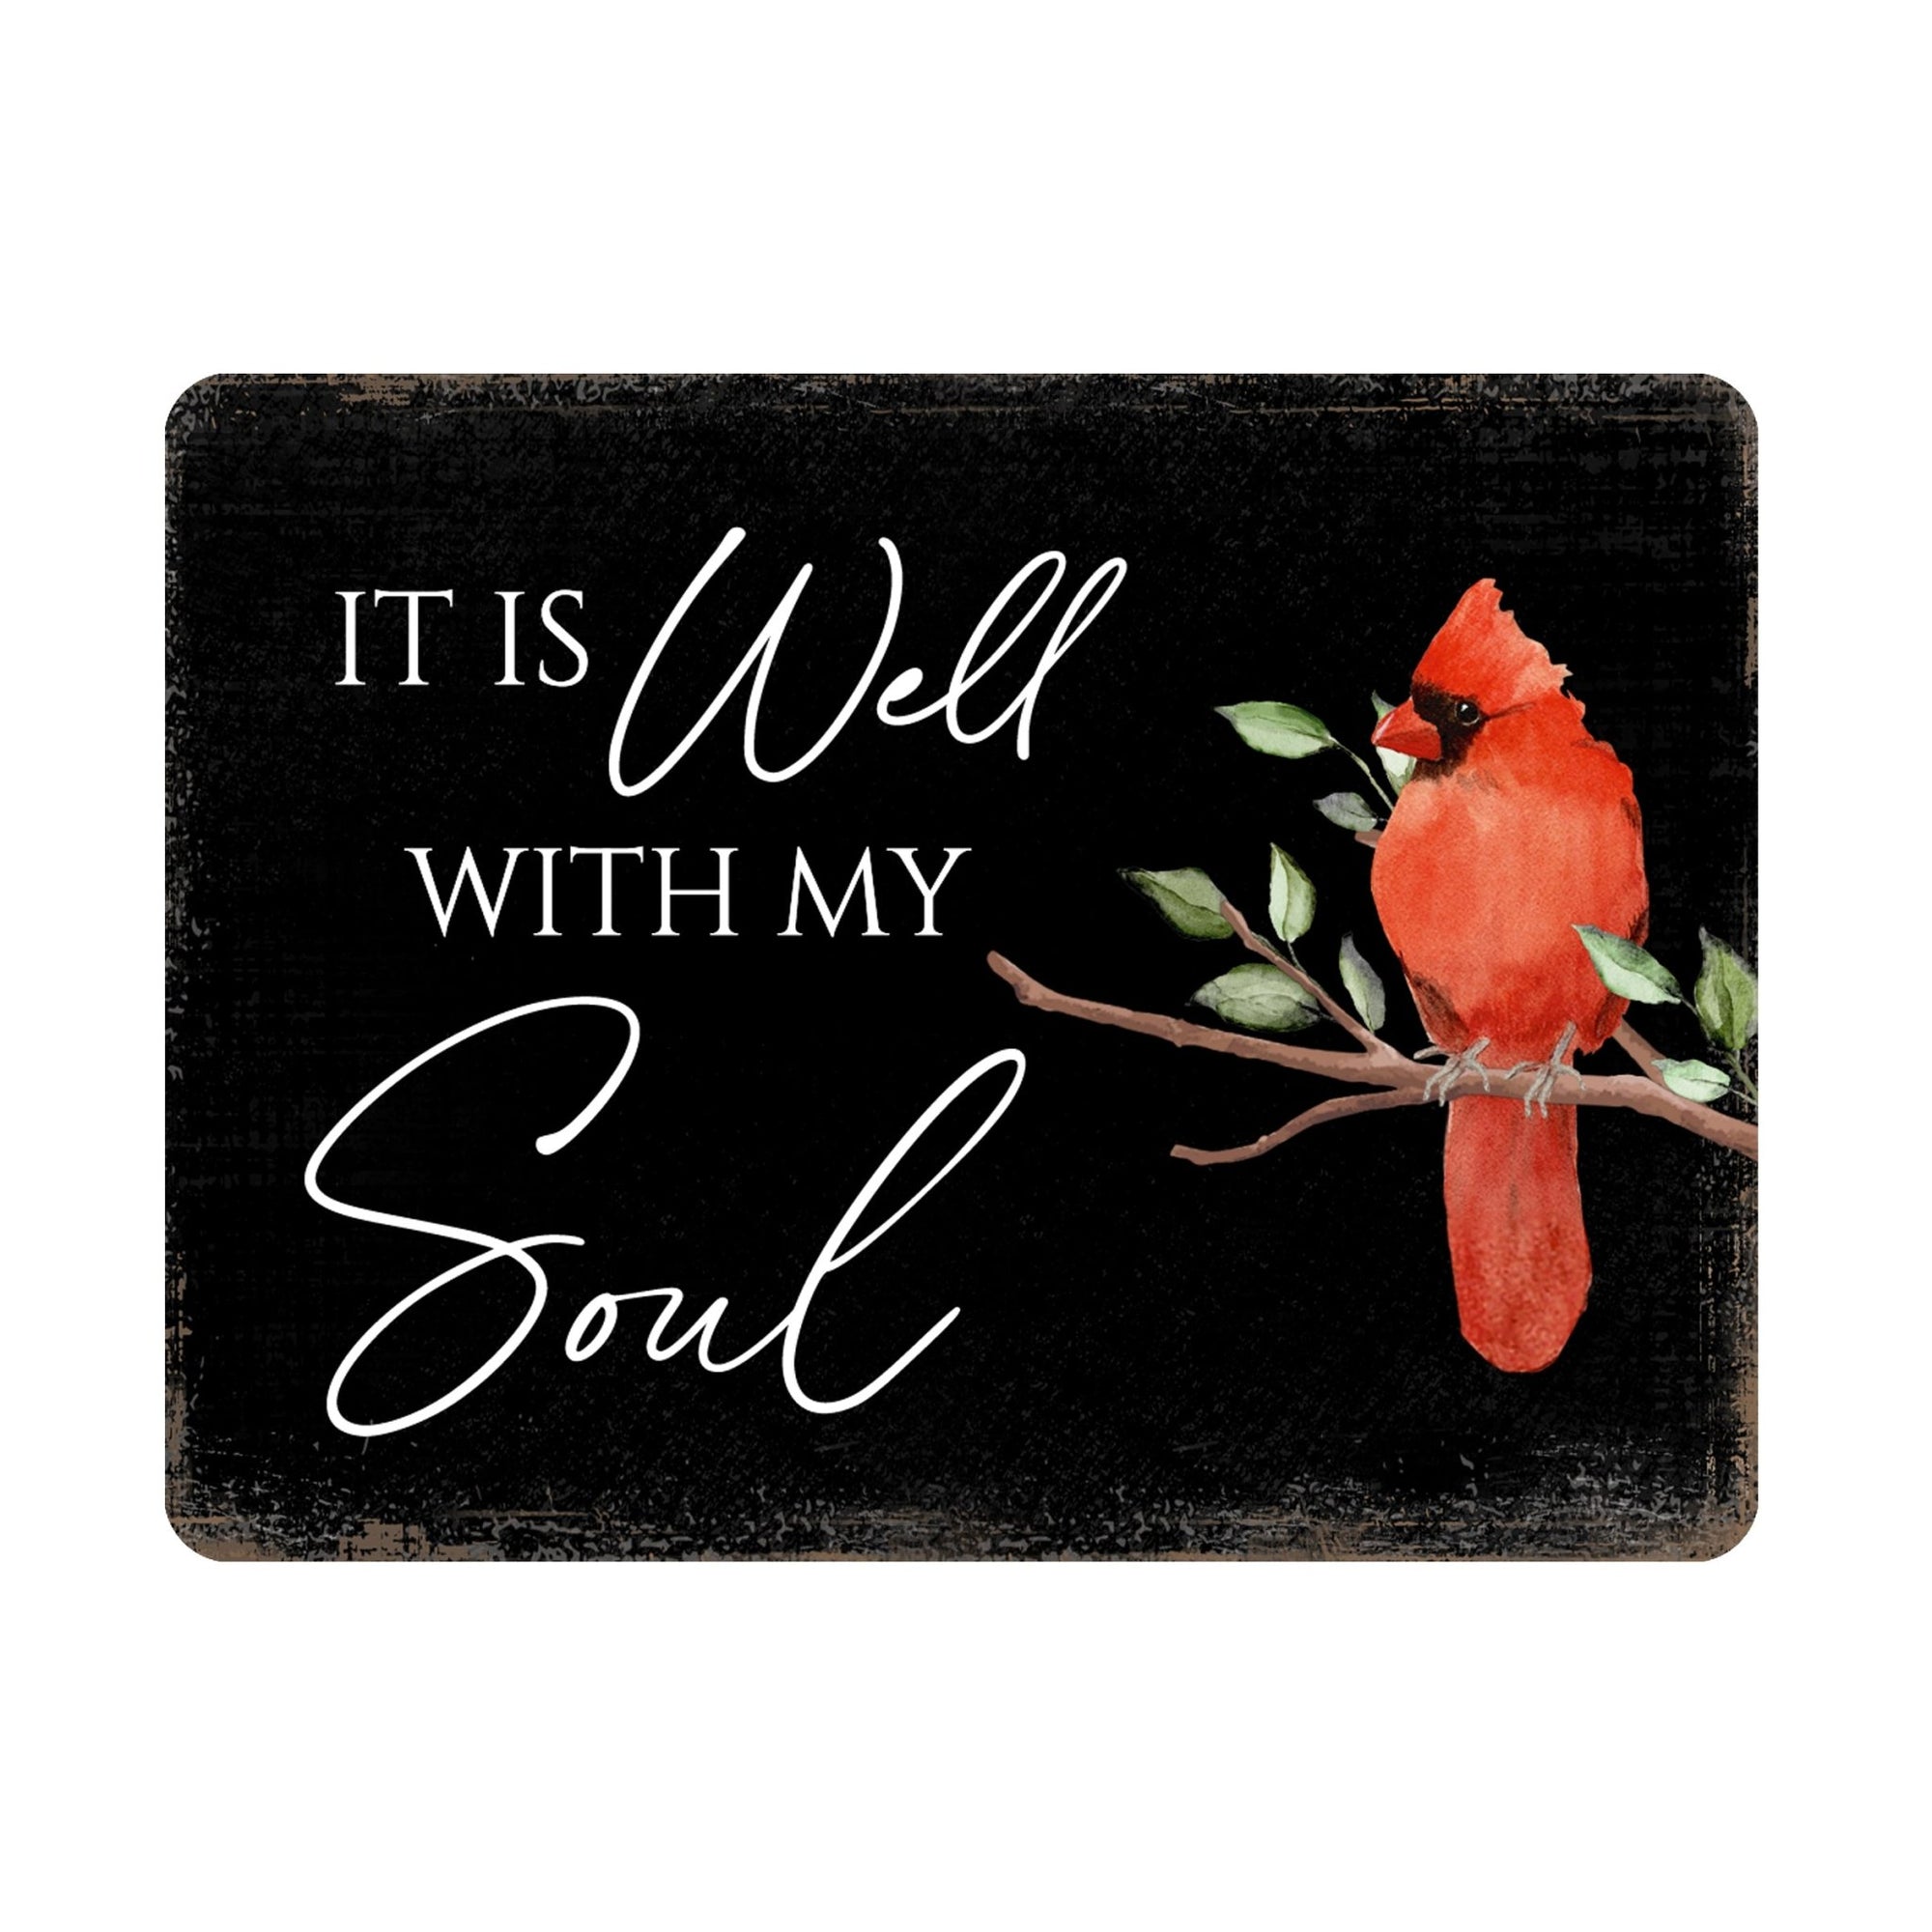 Elegant Vintage-Inspired Cardinal Wooden Magnet Printed With Everyday Inspirational Verses Gift Ideas - It Is Well - LifeSong Milestones